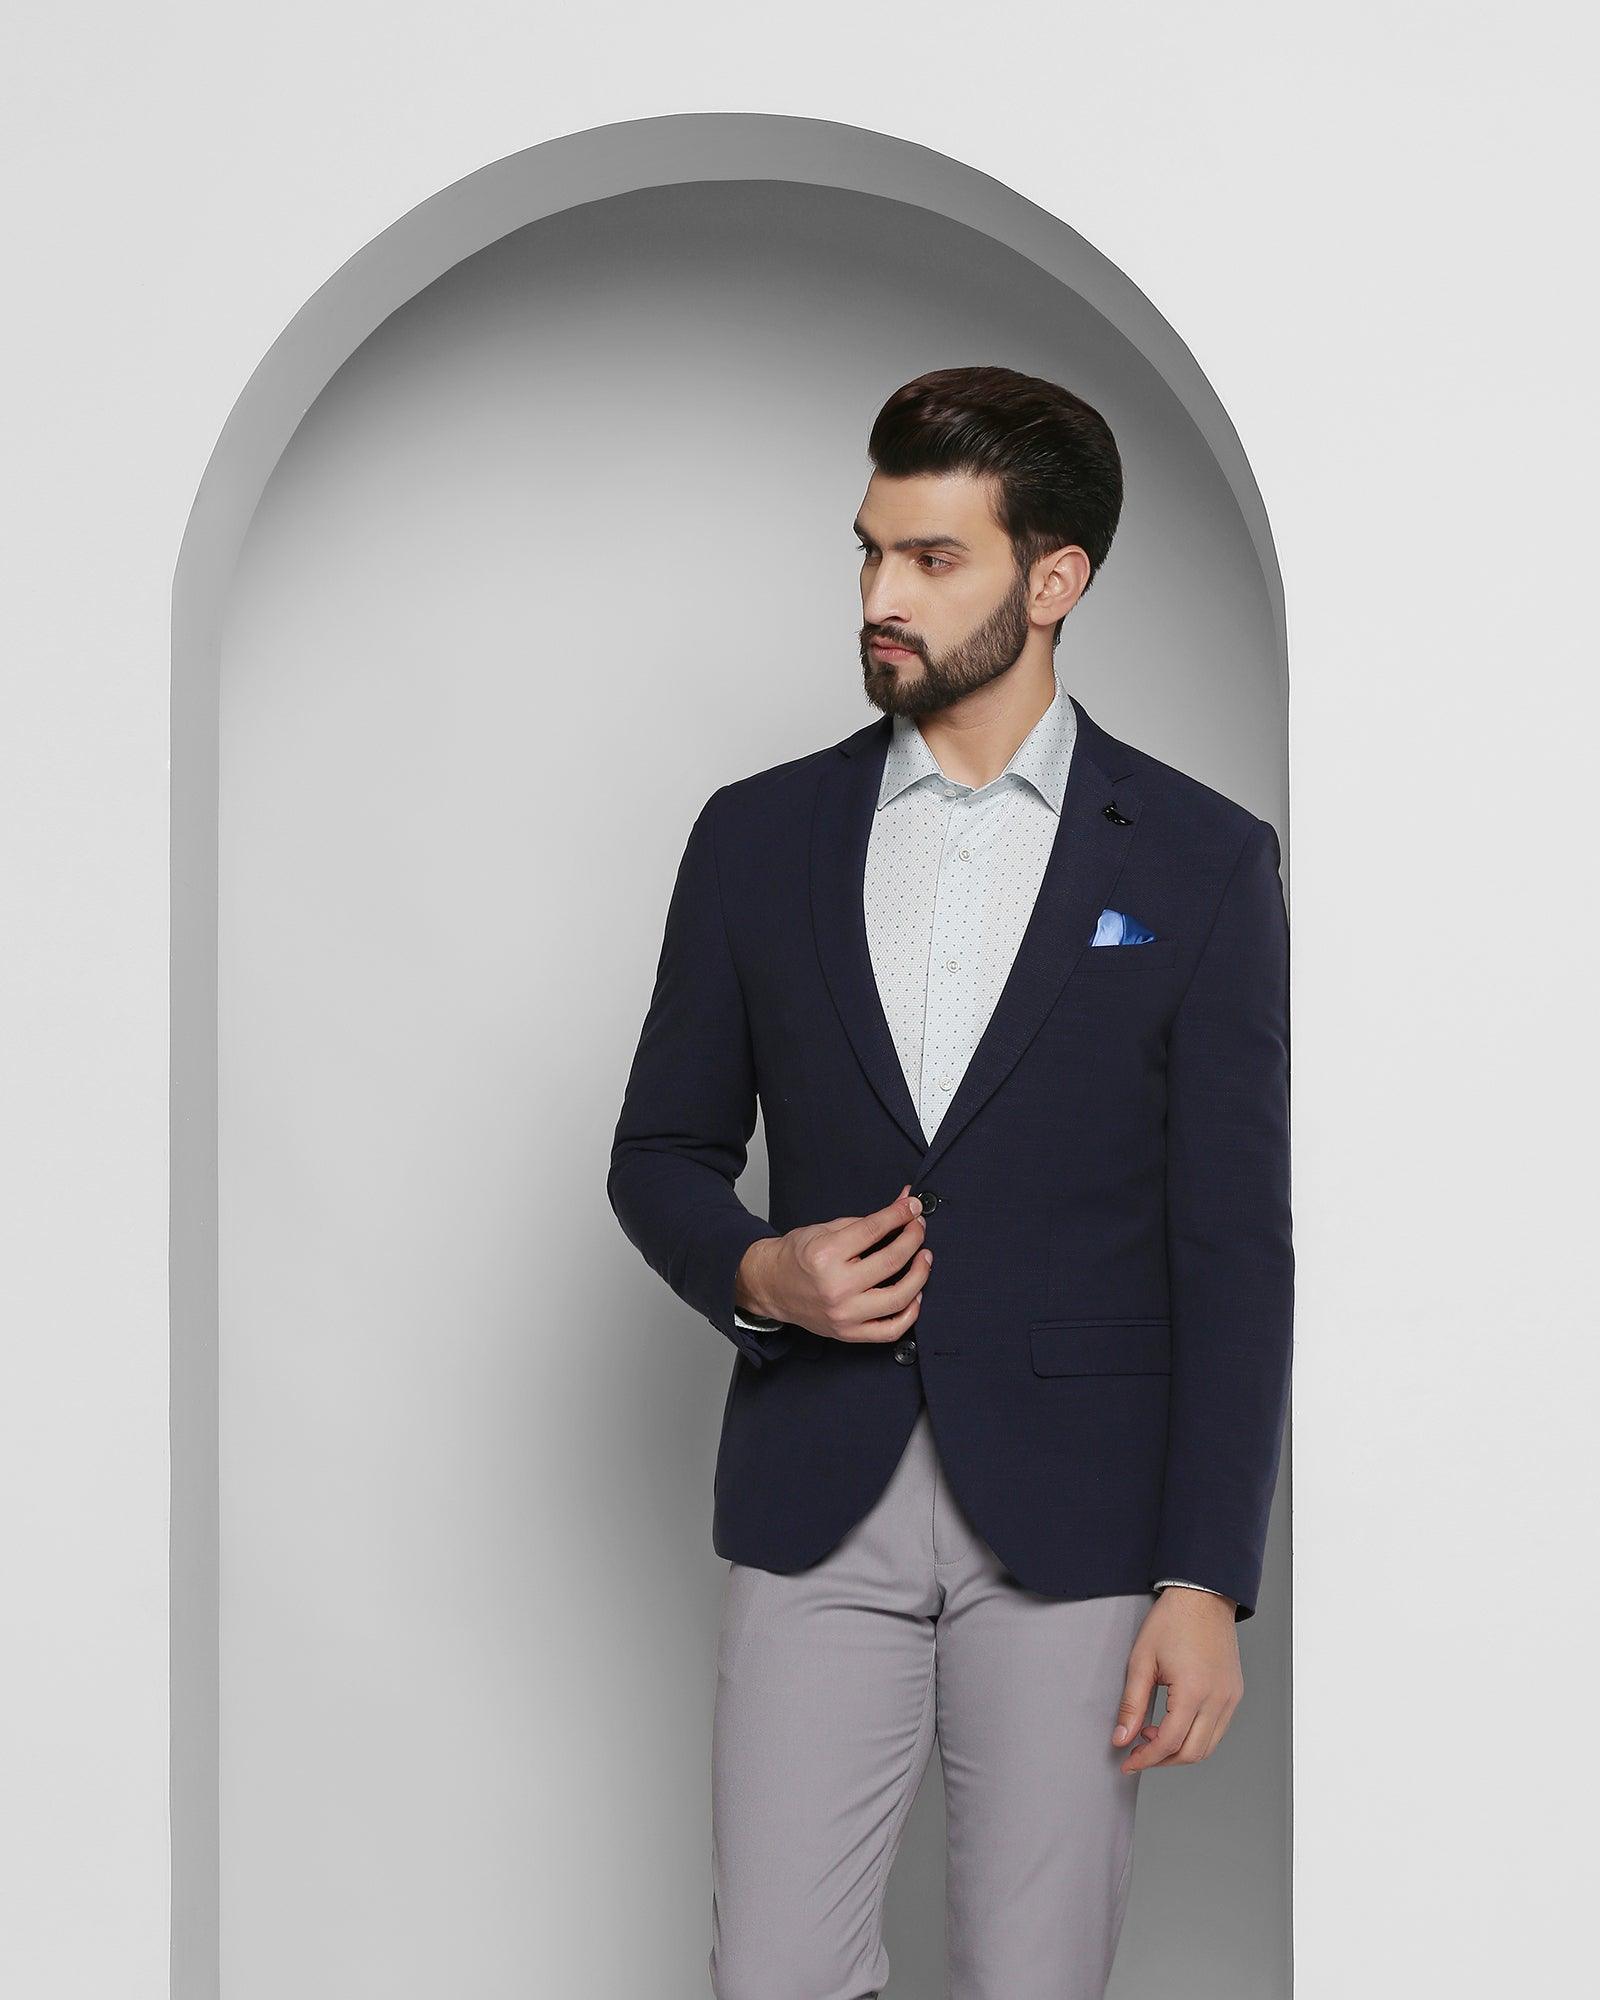 LOUIS PHILIPPE Checkered Single Breasted Formal Men Blazer - Buy LOUIS  PHILIPPE Checkered Single Breasted Formal Men Blazer Online at Best Prices  in India